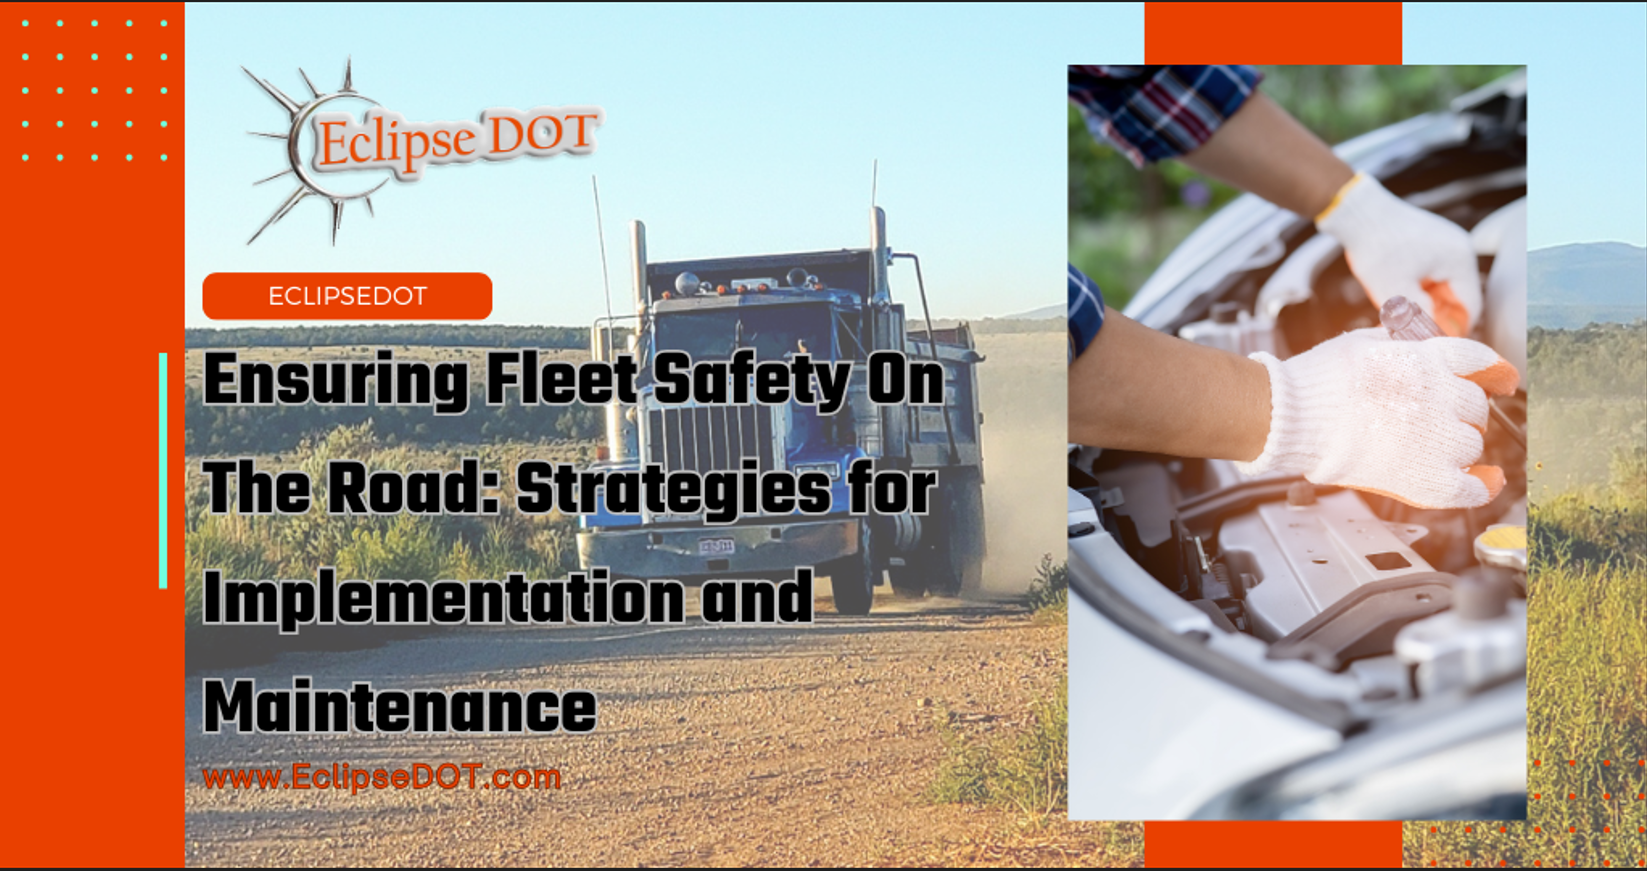 Ensuring Fleet Safety On The Road: Strategies for Implementation and Maintenance